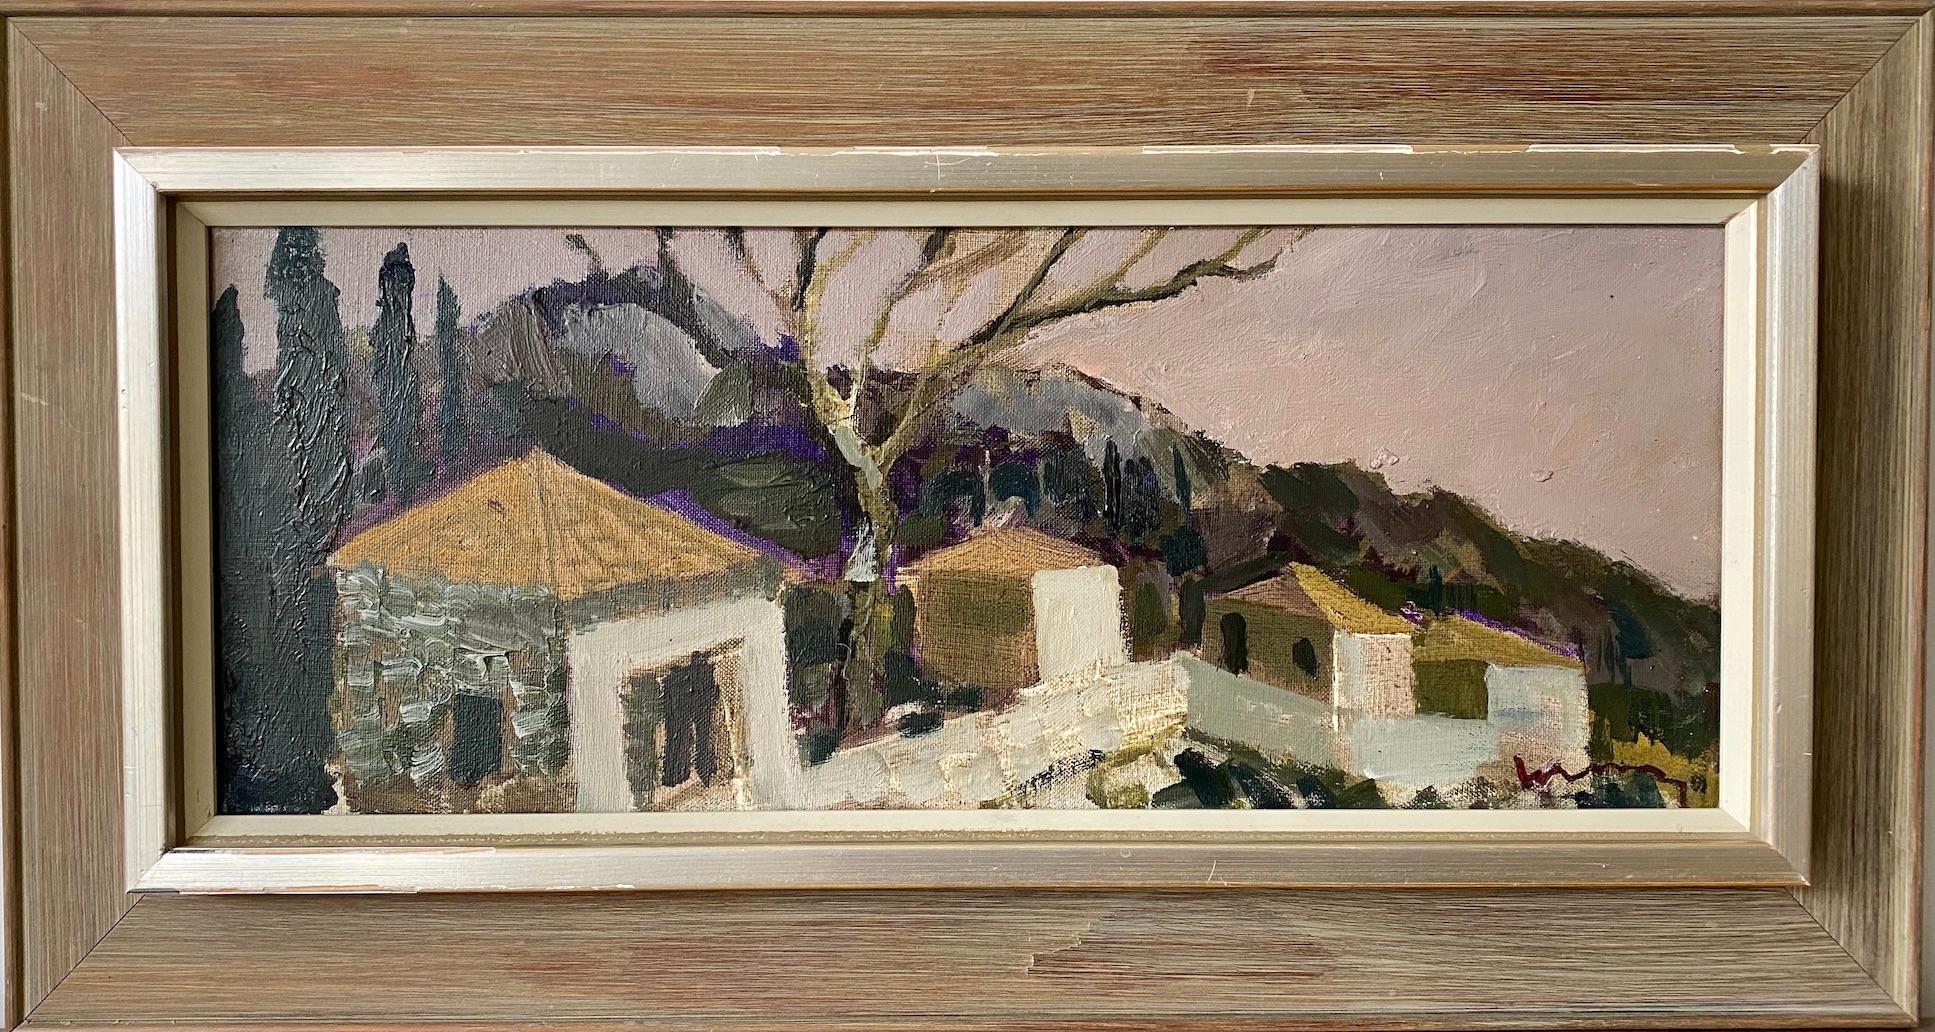 Unknown Landscape Painting - Vintage Town Landscape Framed Oil Painting Swedish Art - Sunset View